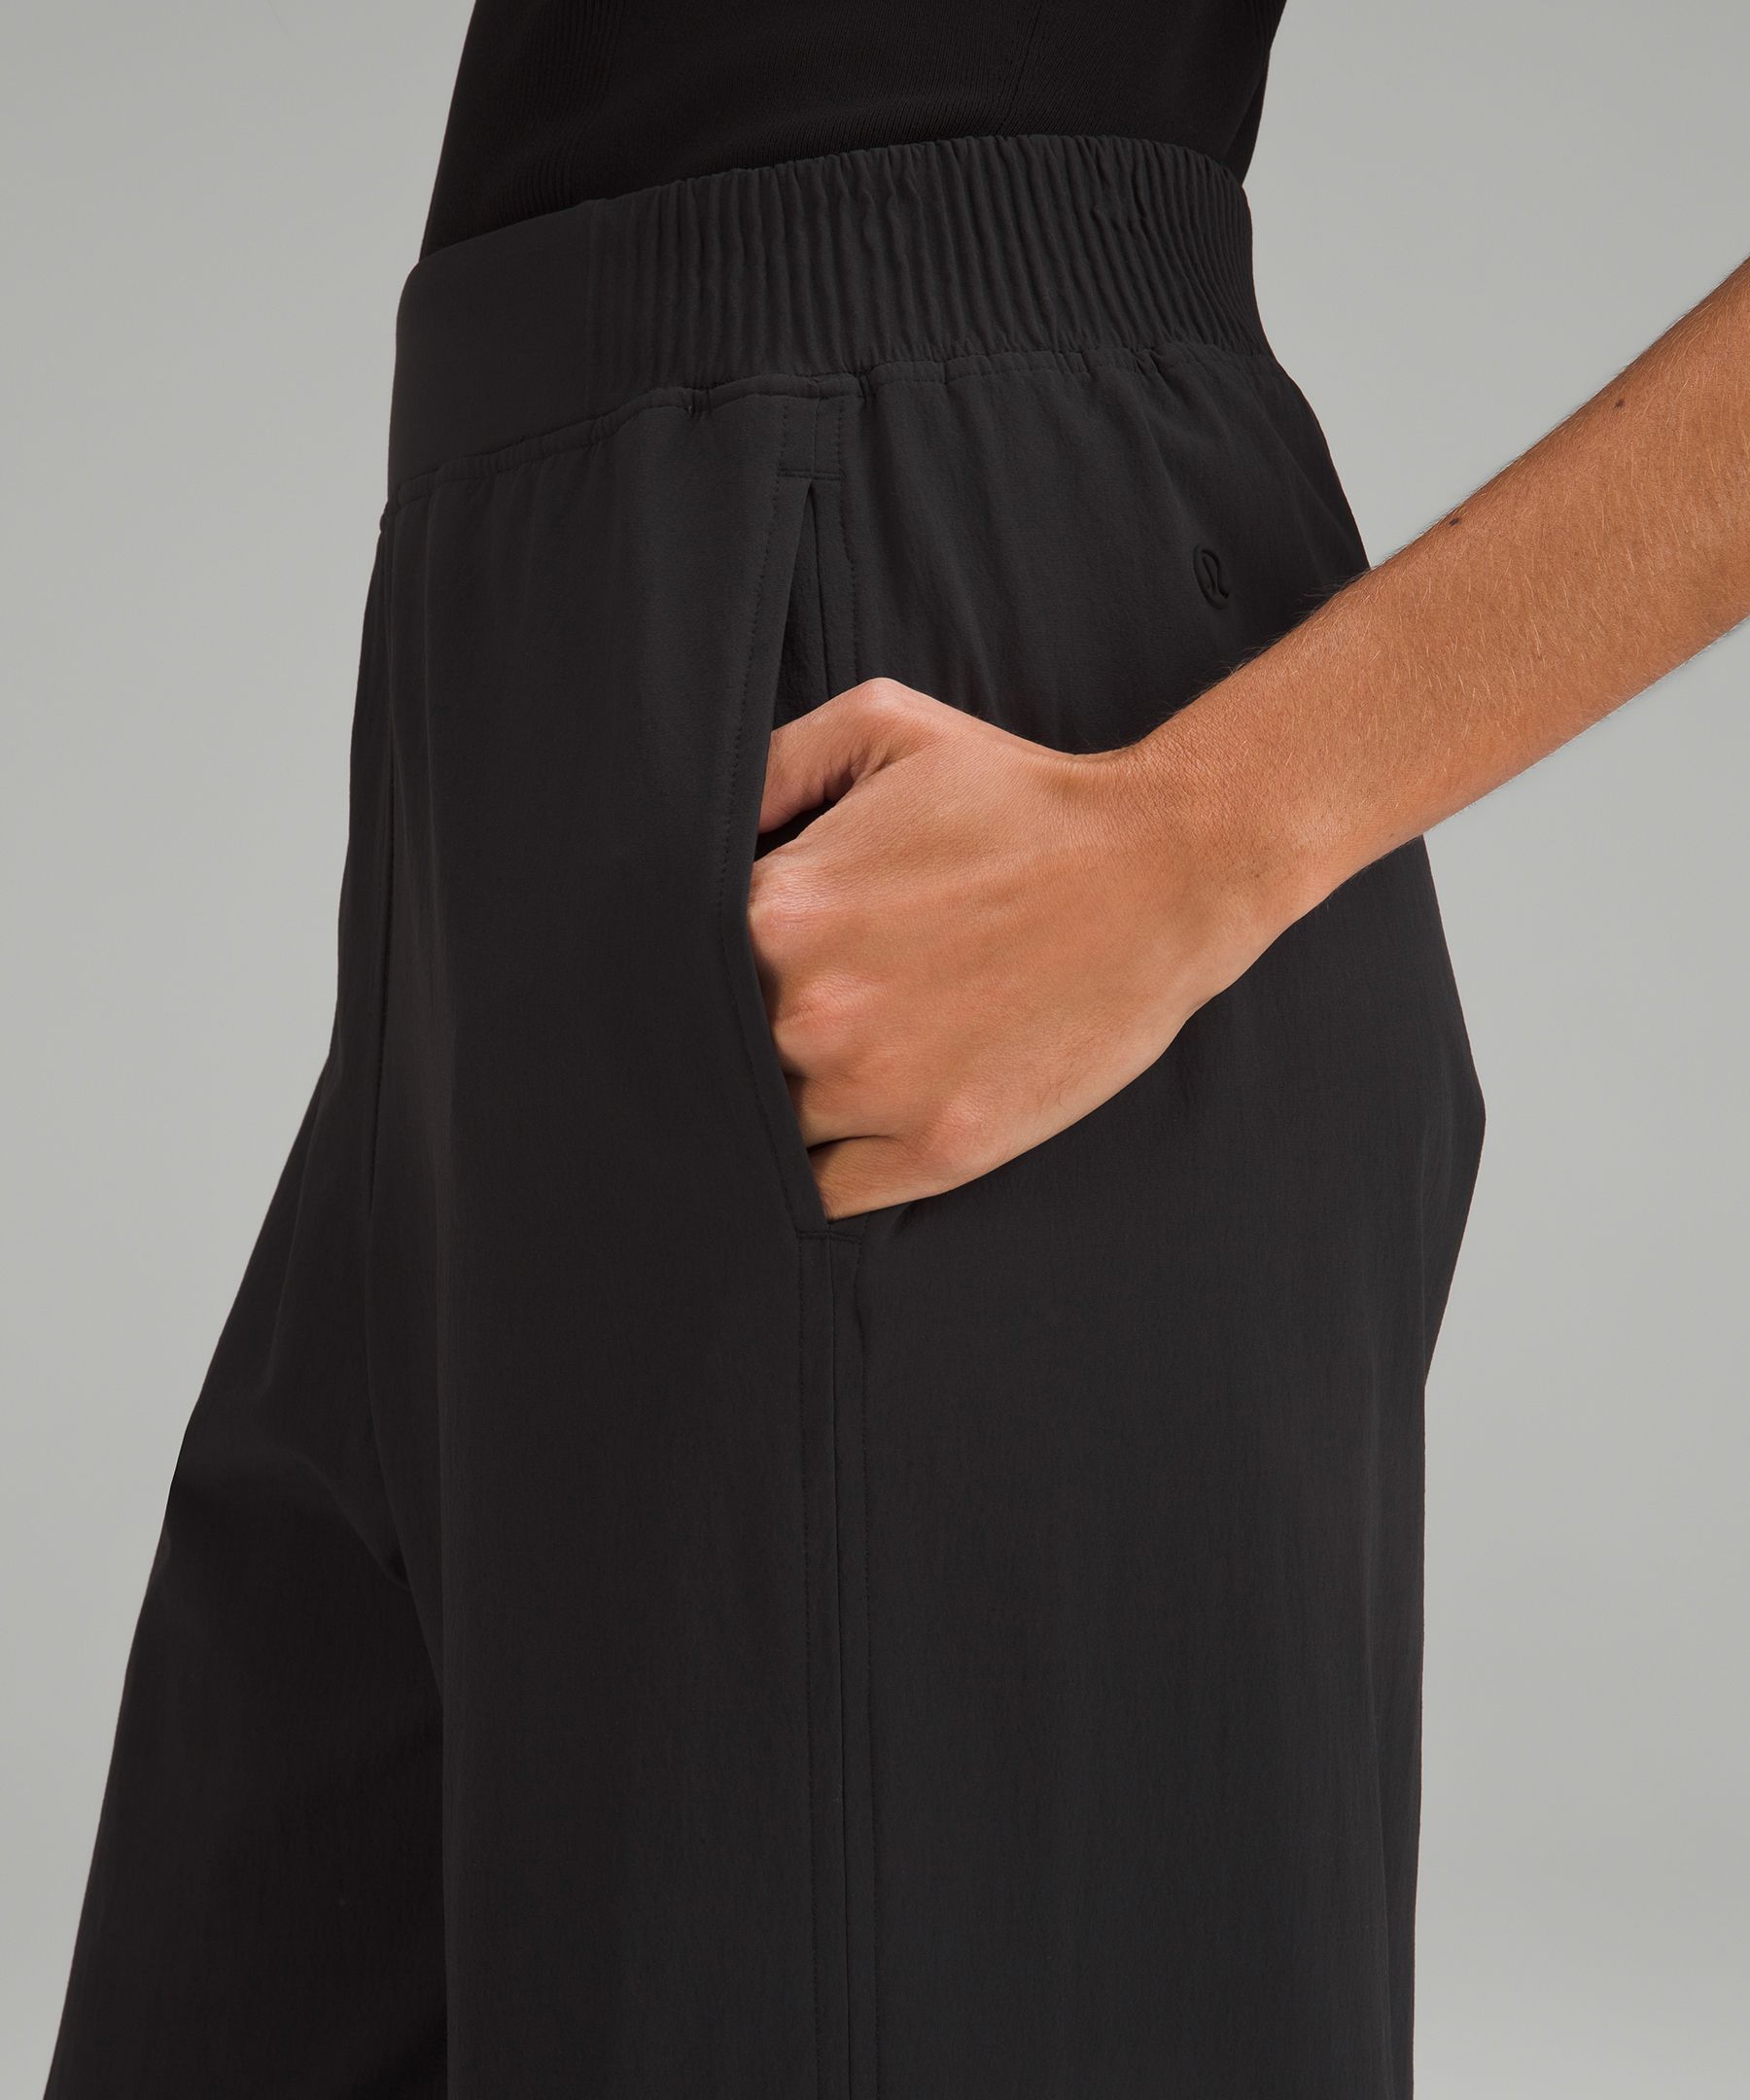 Stretch Woven High-Rise Wide-Leg Pant